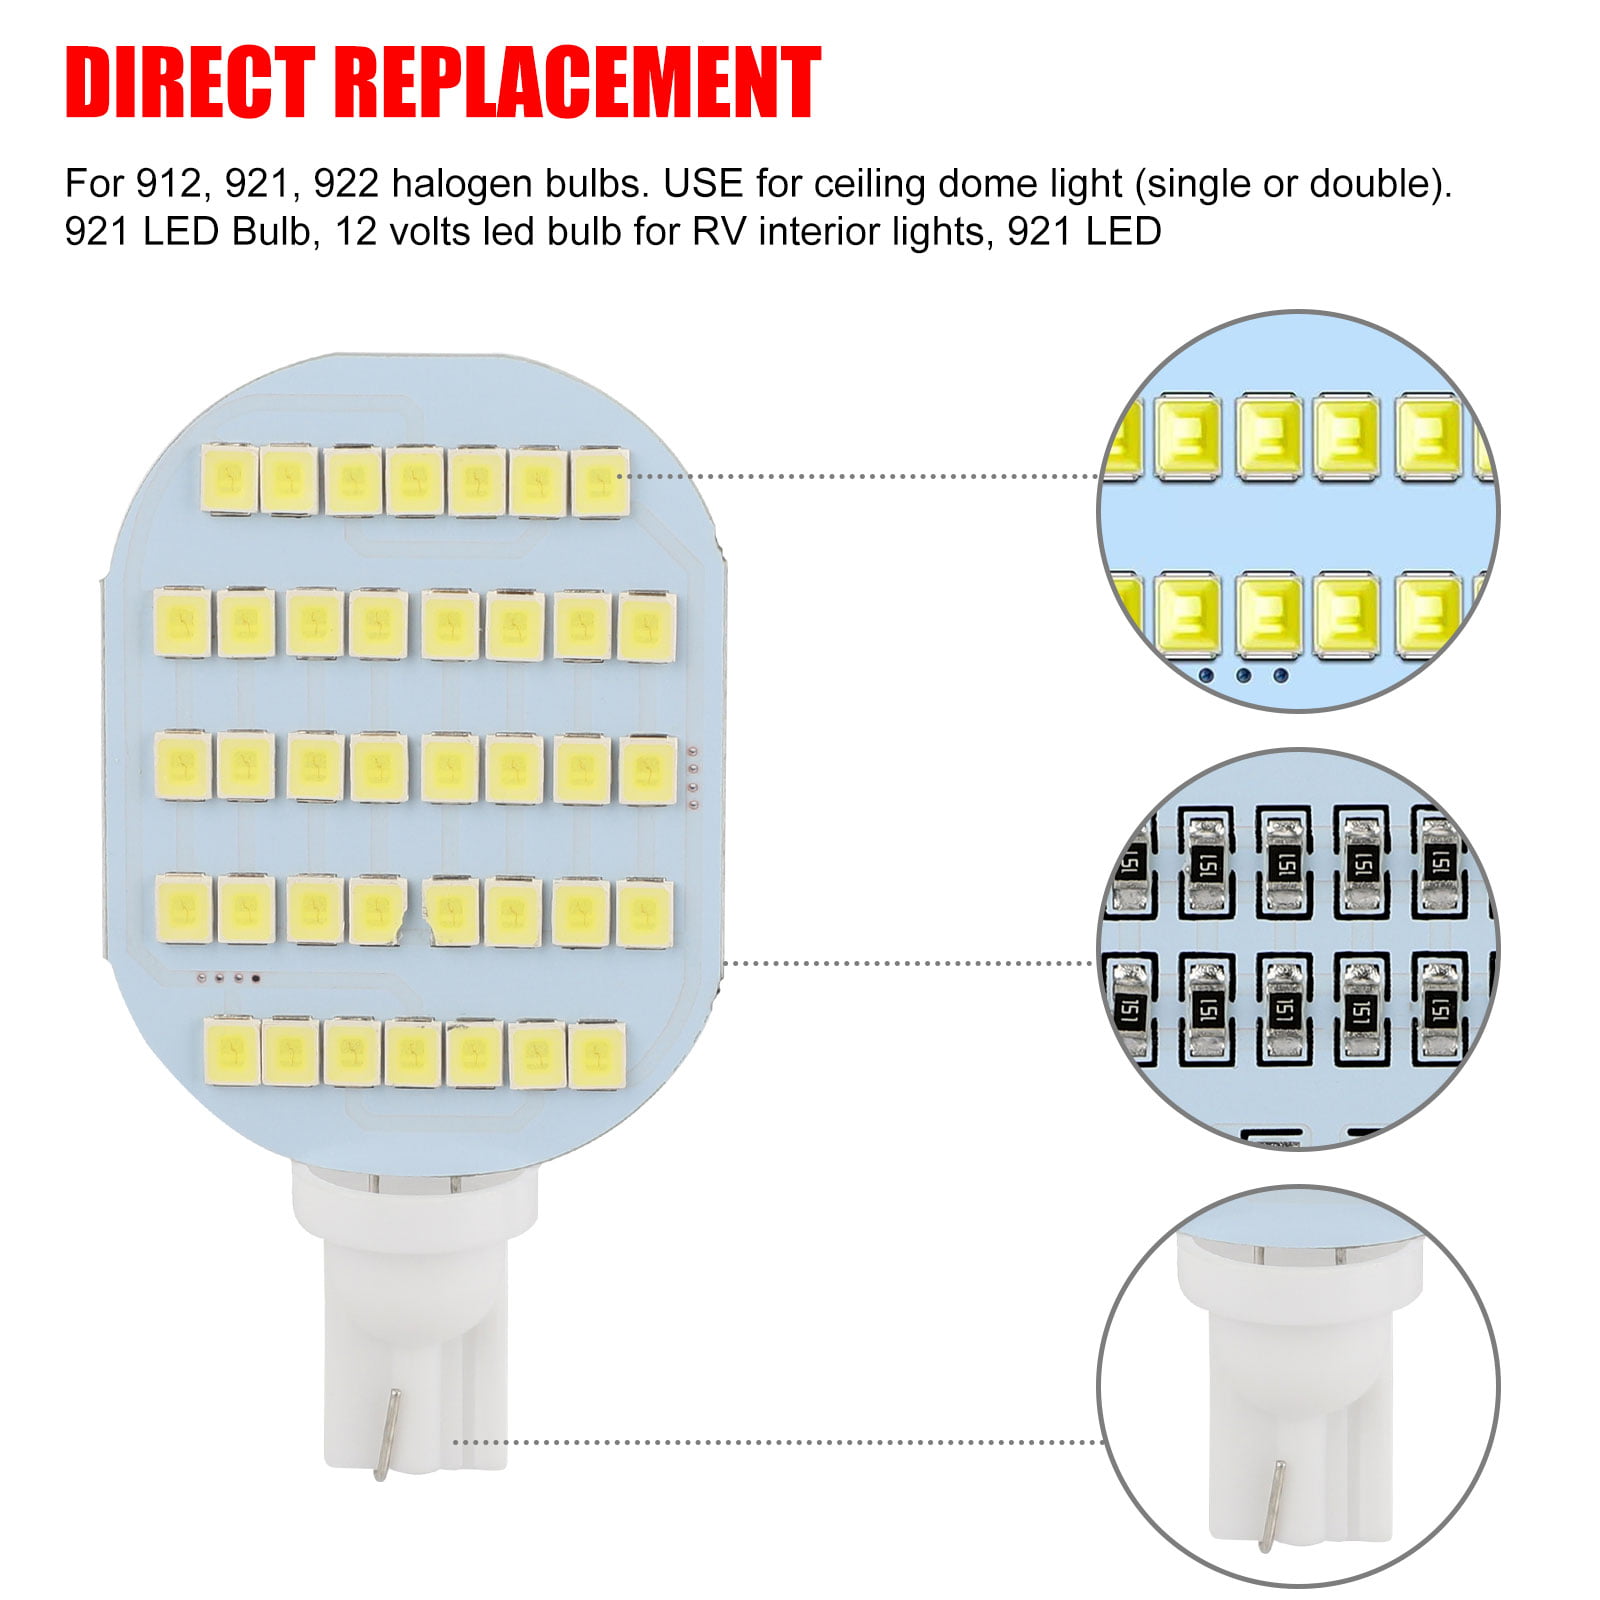 YITAMOTOR Super Bright T10 194 168 921 LED Light Bulbs for Car Camper Dome Interior Lights Landscaping RV Trailer Side Wedge 24-3528 SMD Pack of 10 Warm White 3500k